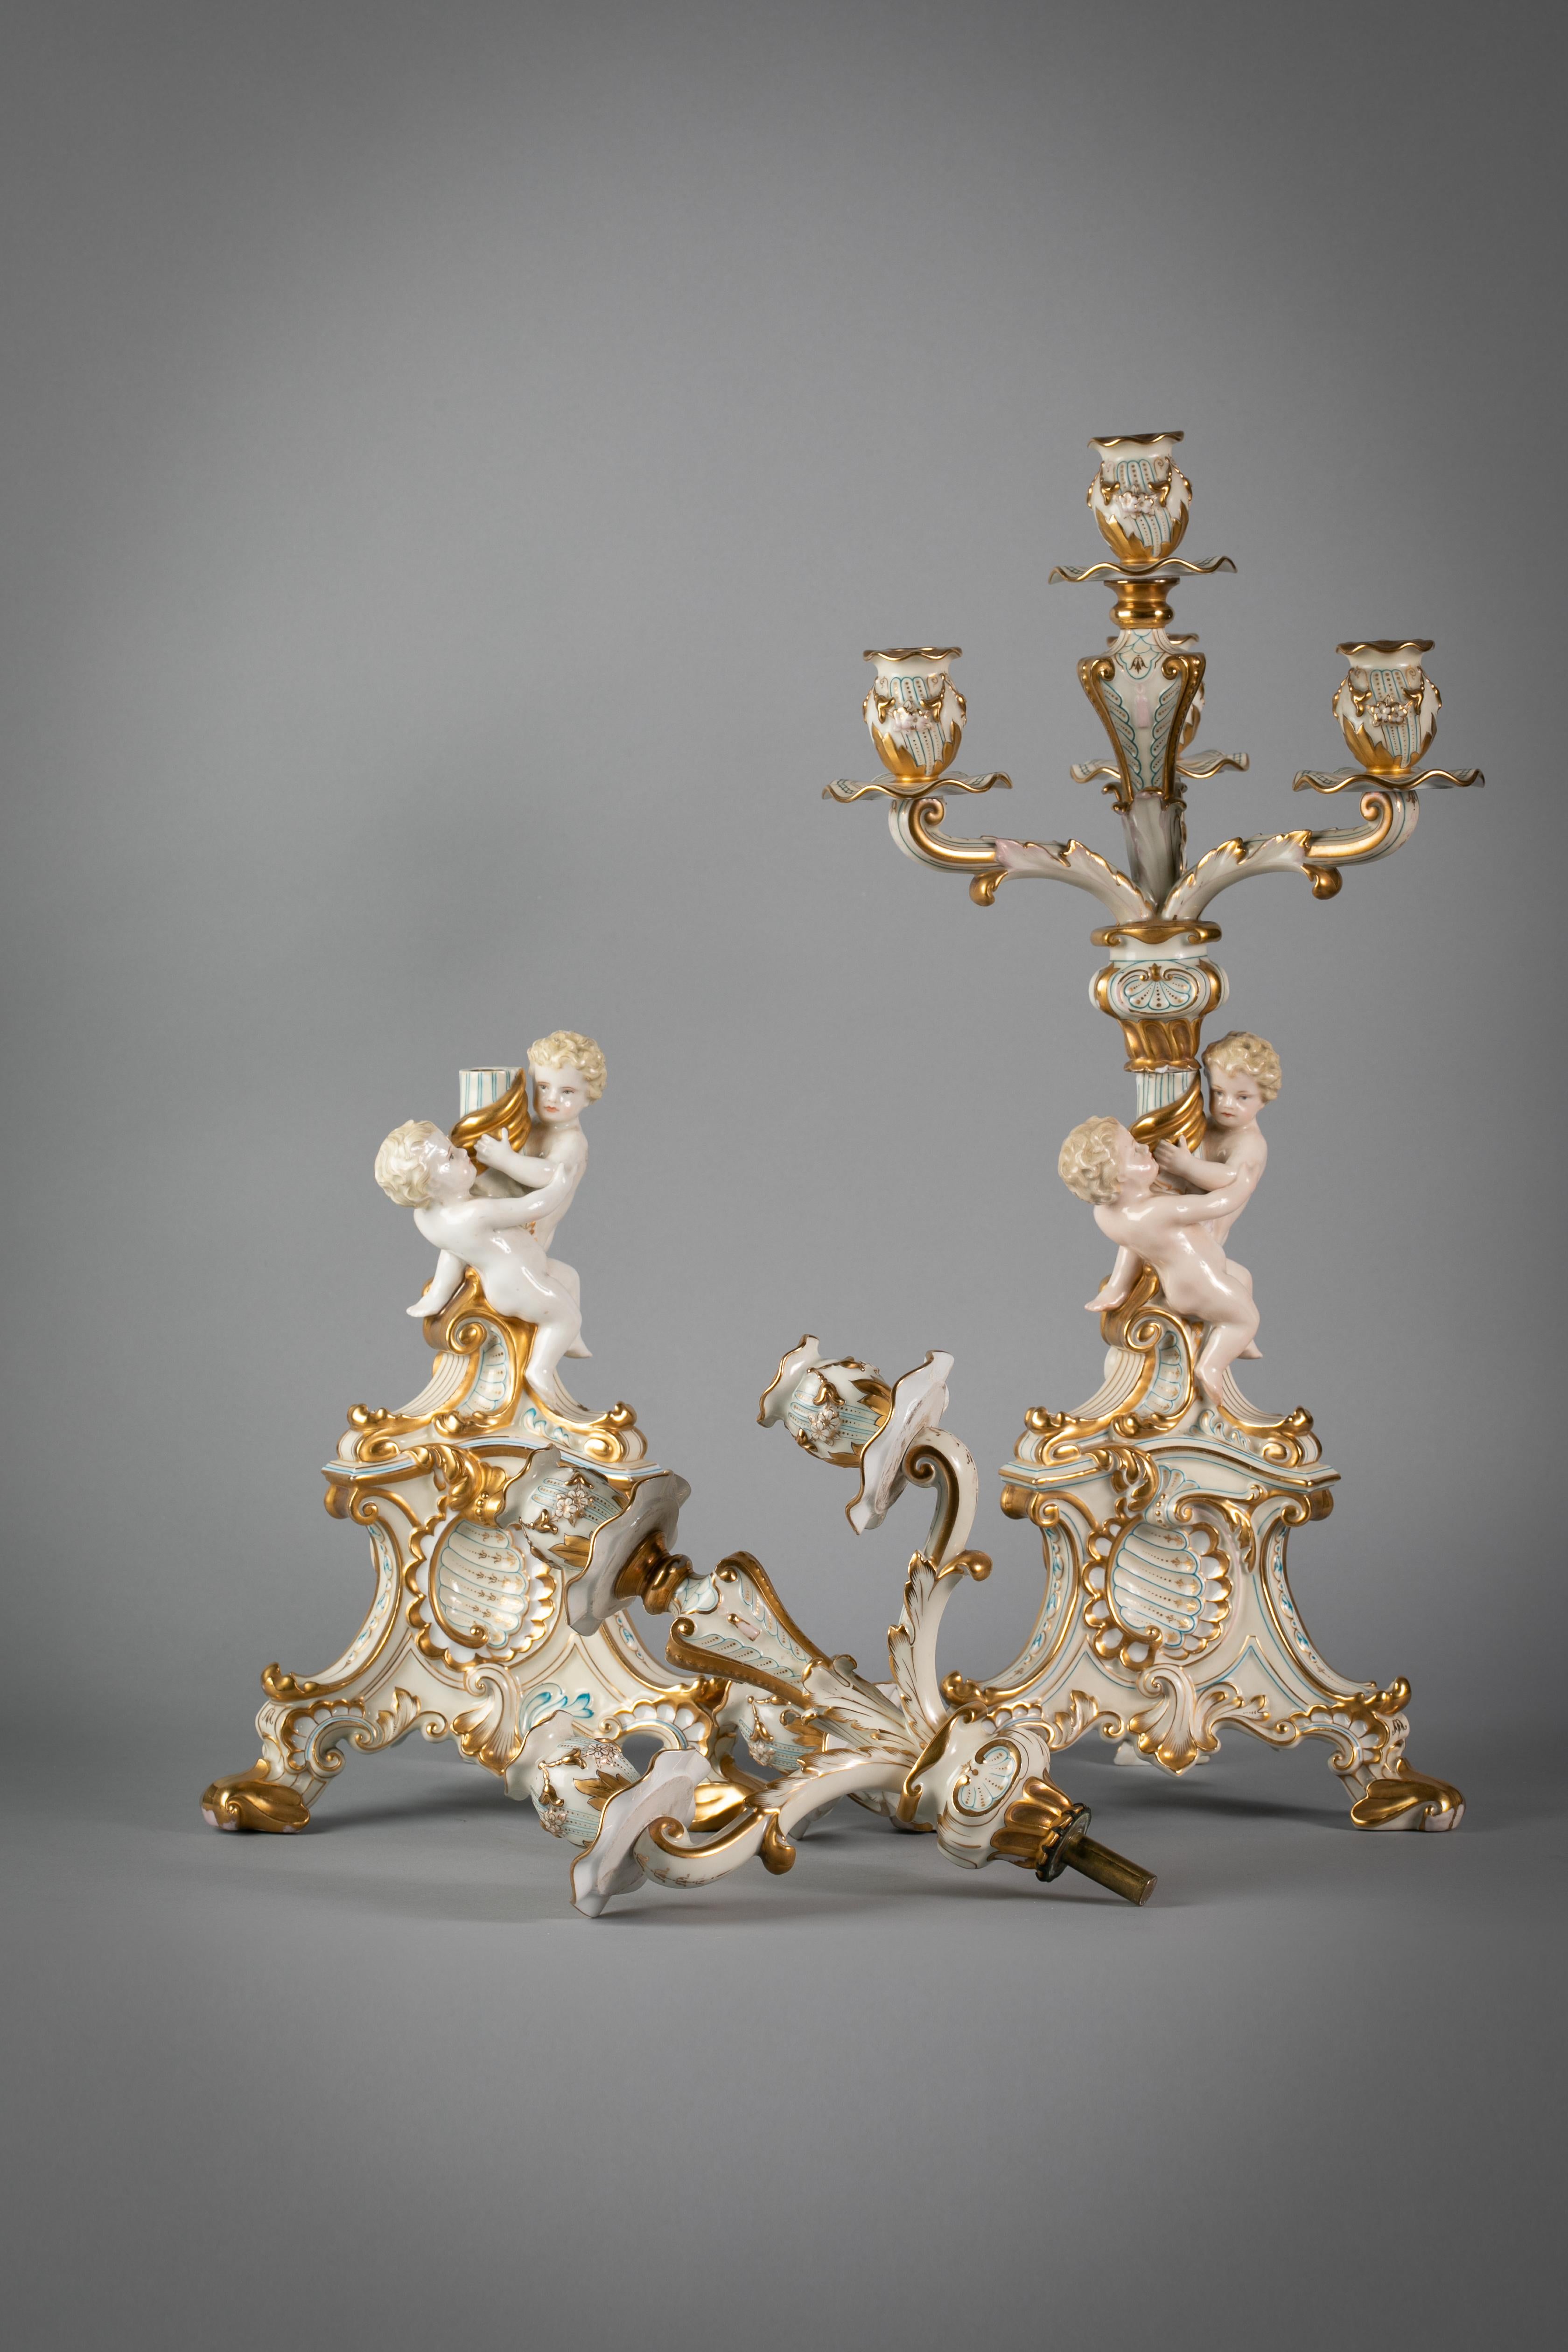 Each four-light candelabrum branch supported by a pair of putti on a triangular Rococo base molded with shell motifs. Marked Pirkenhamer.